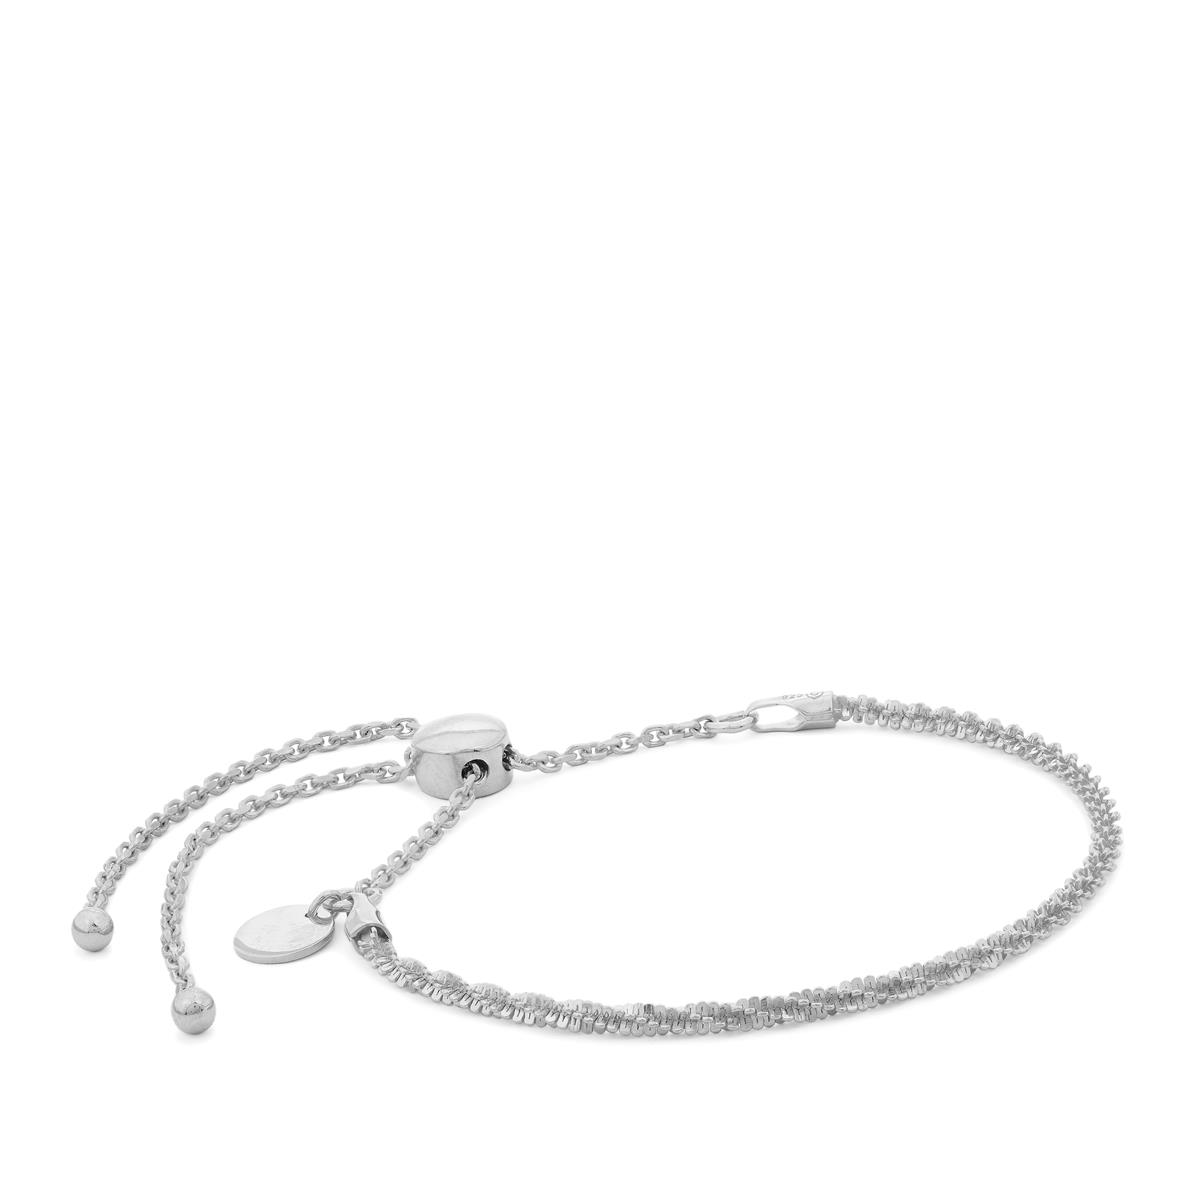 925 Sterling Silver Slider 925 Silver Bangles Classic Moments Bracelet For  Womens Fashion And Wedding Jewelry Making High Polished Gift From Ewjyy,  $32.26 | DHgate.Com